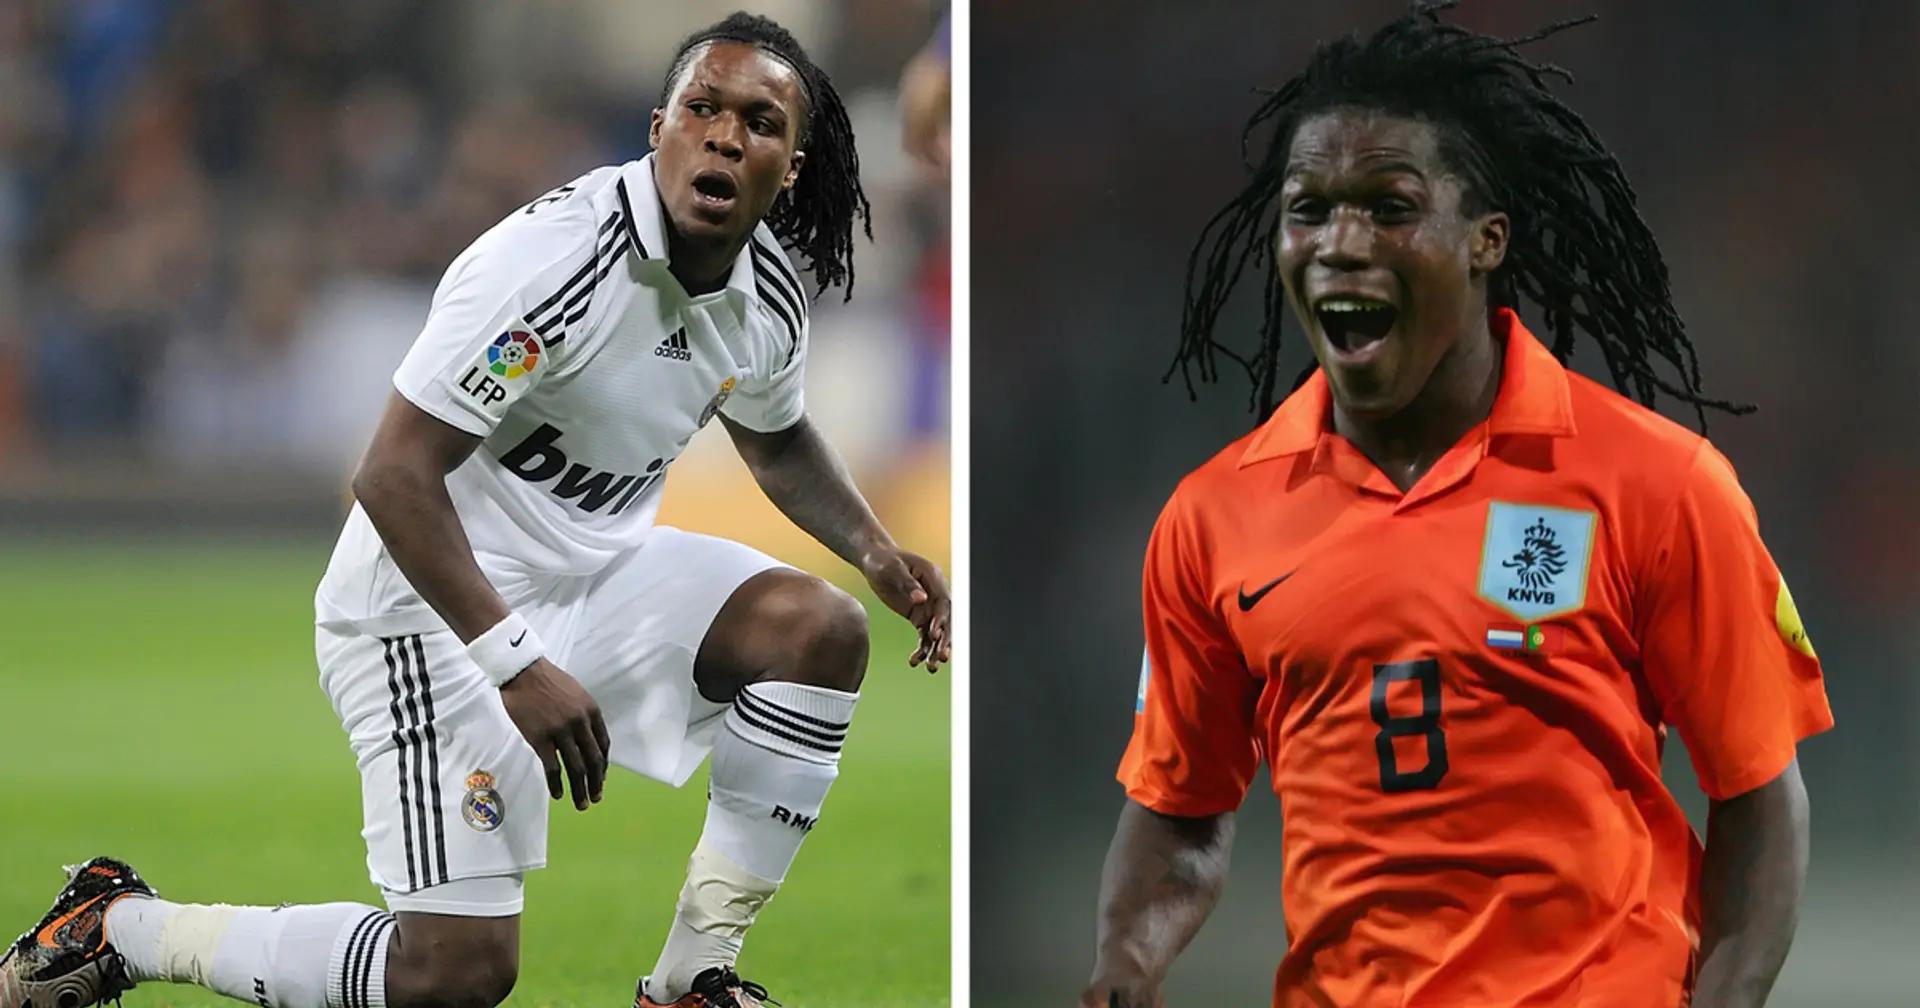 'When I heard that Madrid wanted me, my mind was made up': 4-goal flop Drenthe explains how Bernabeu move happened